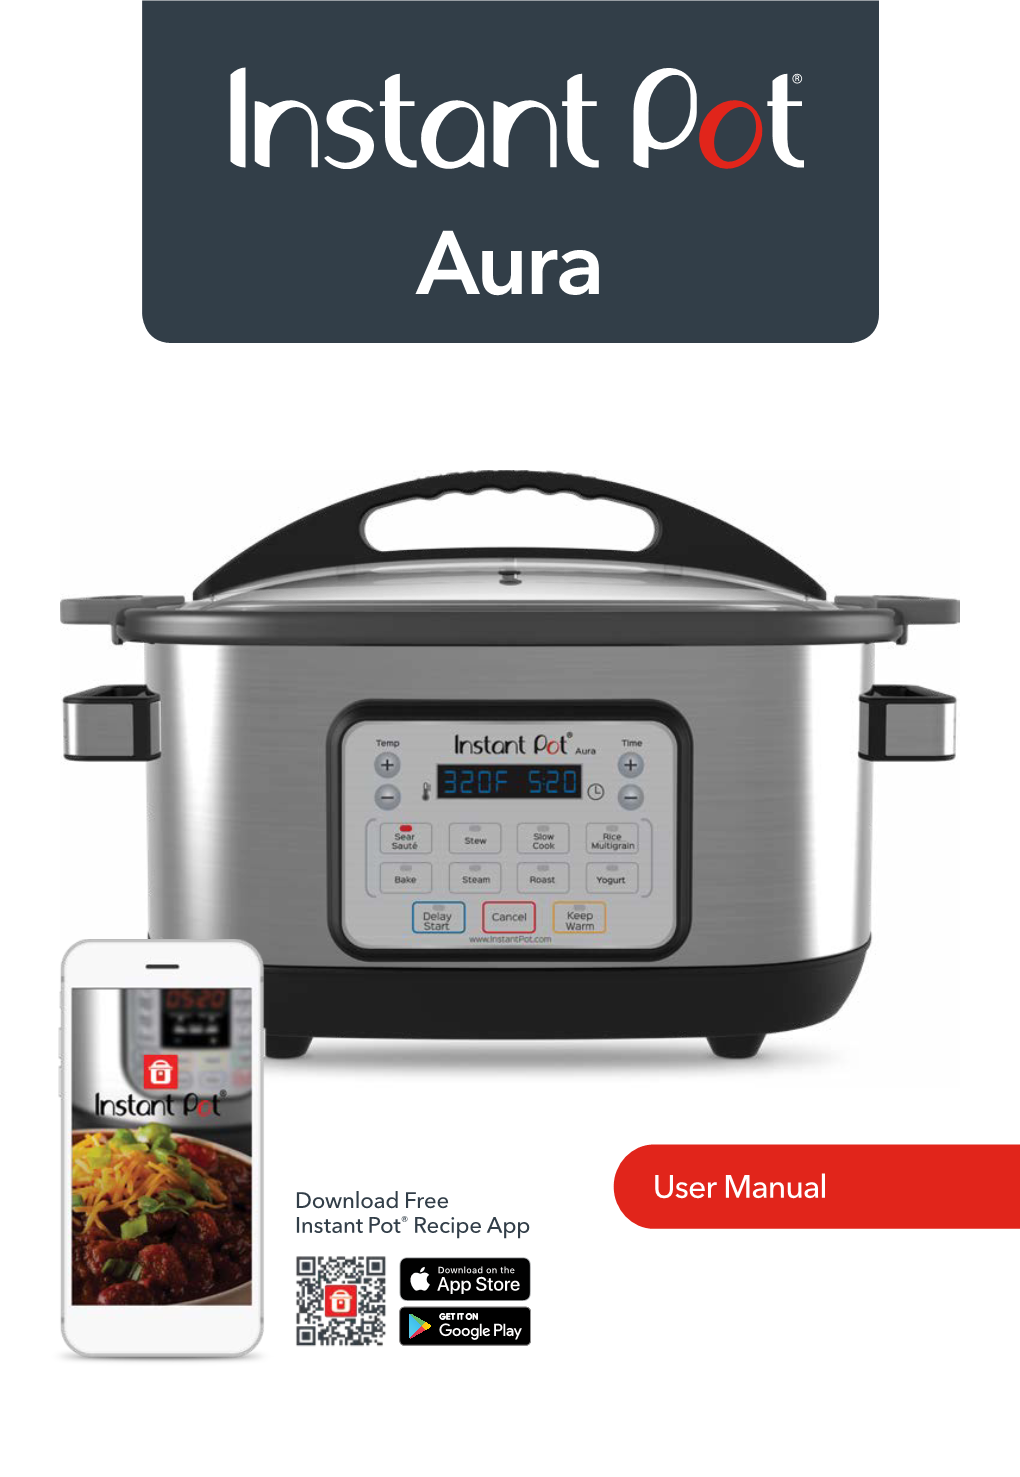 User Manual Instant Pot® Recipe App Welcome to the World of Cooking!